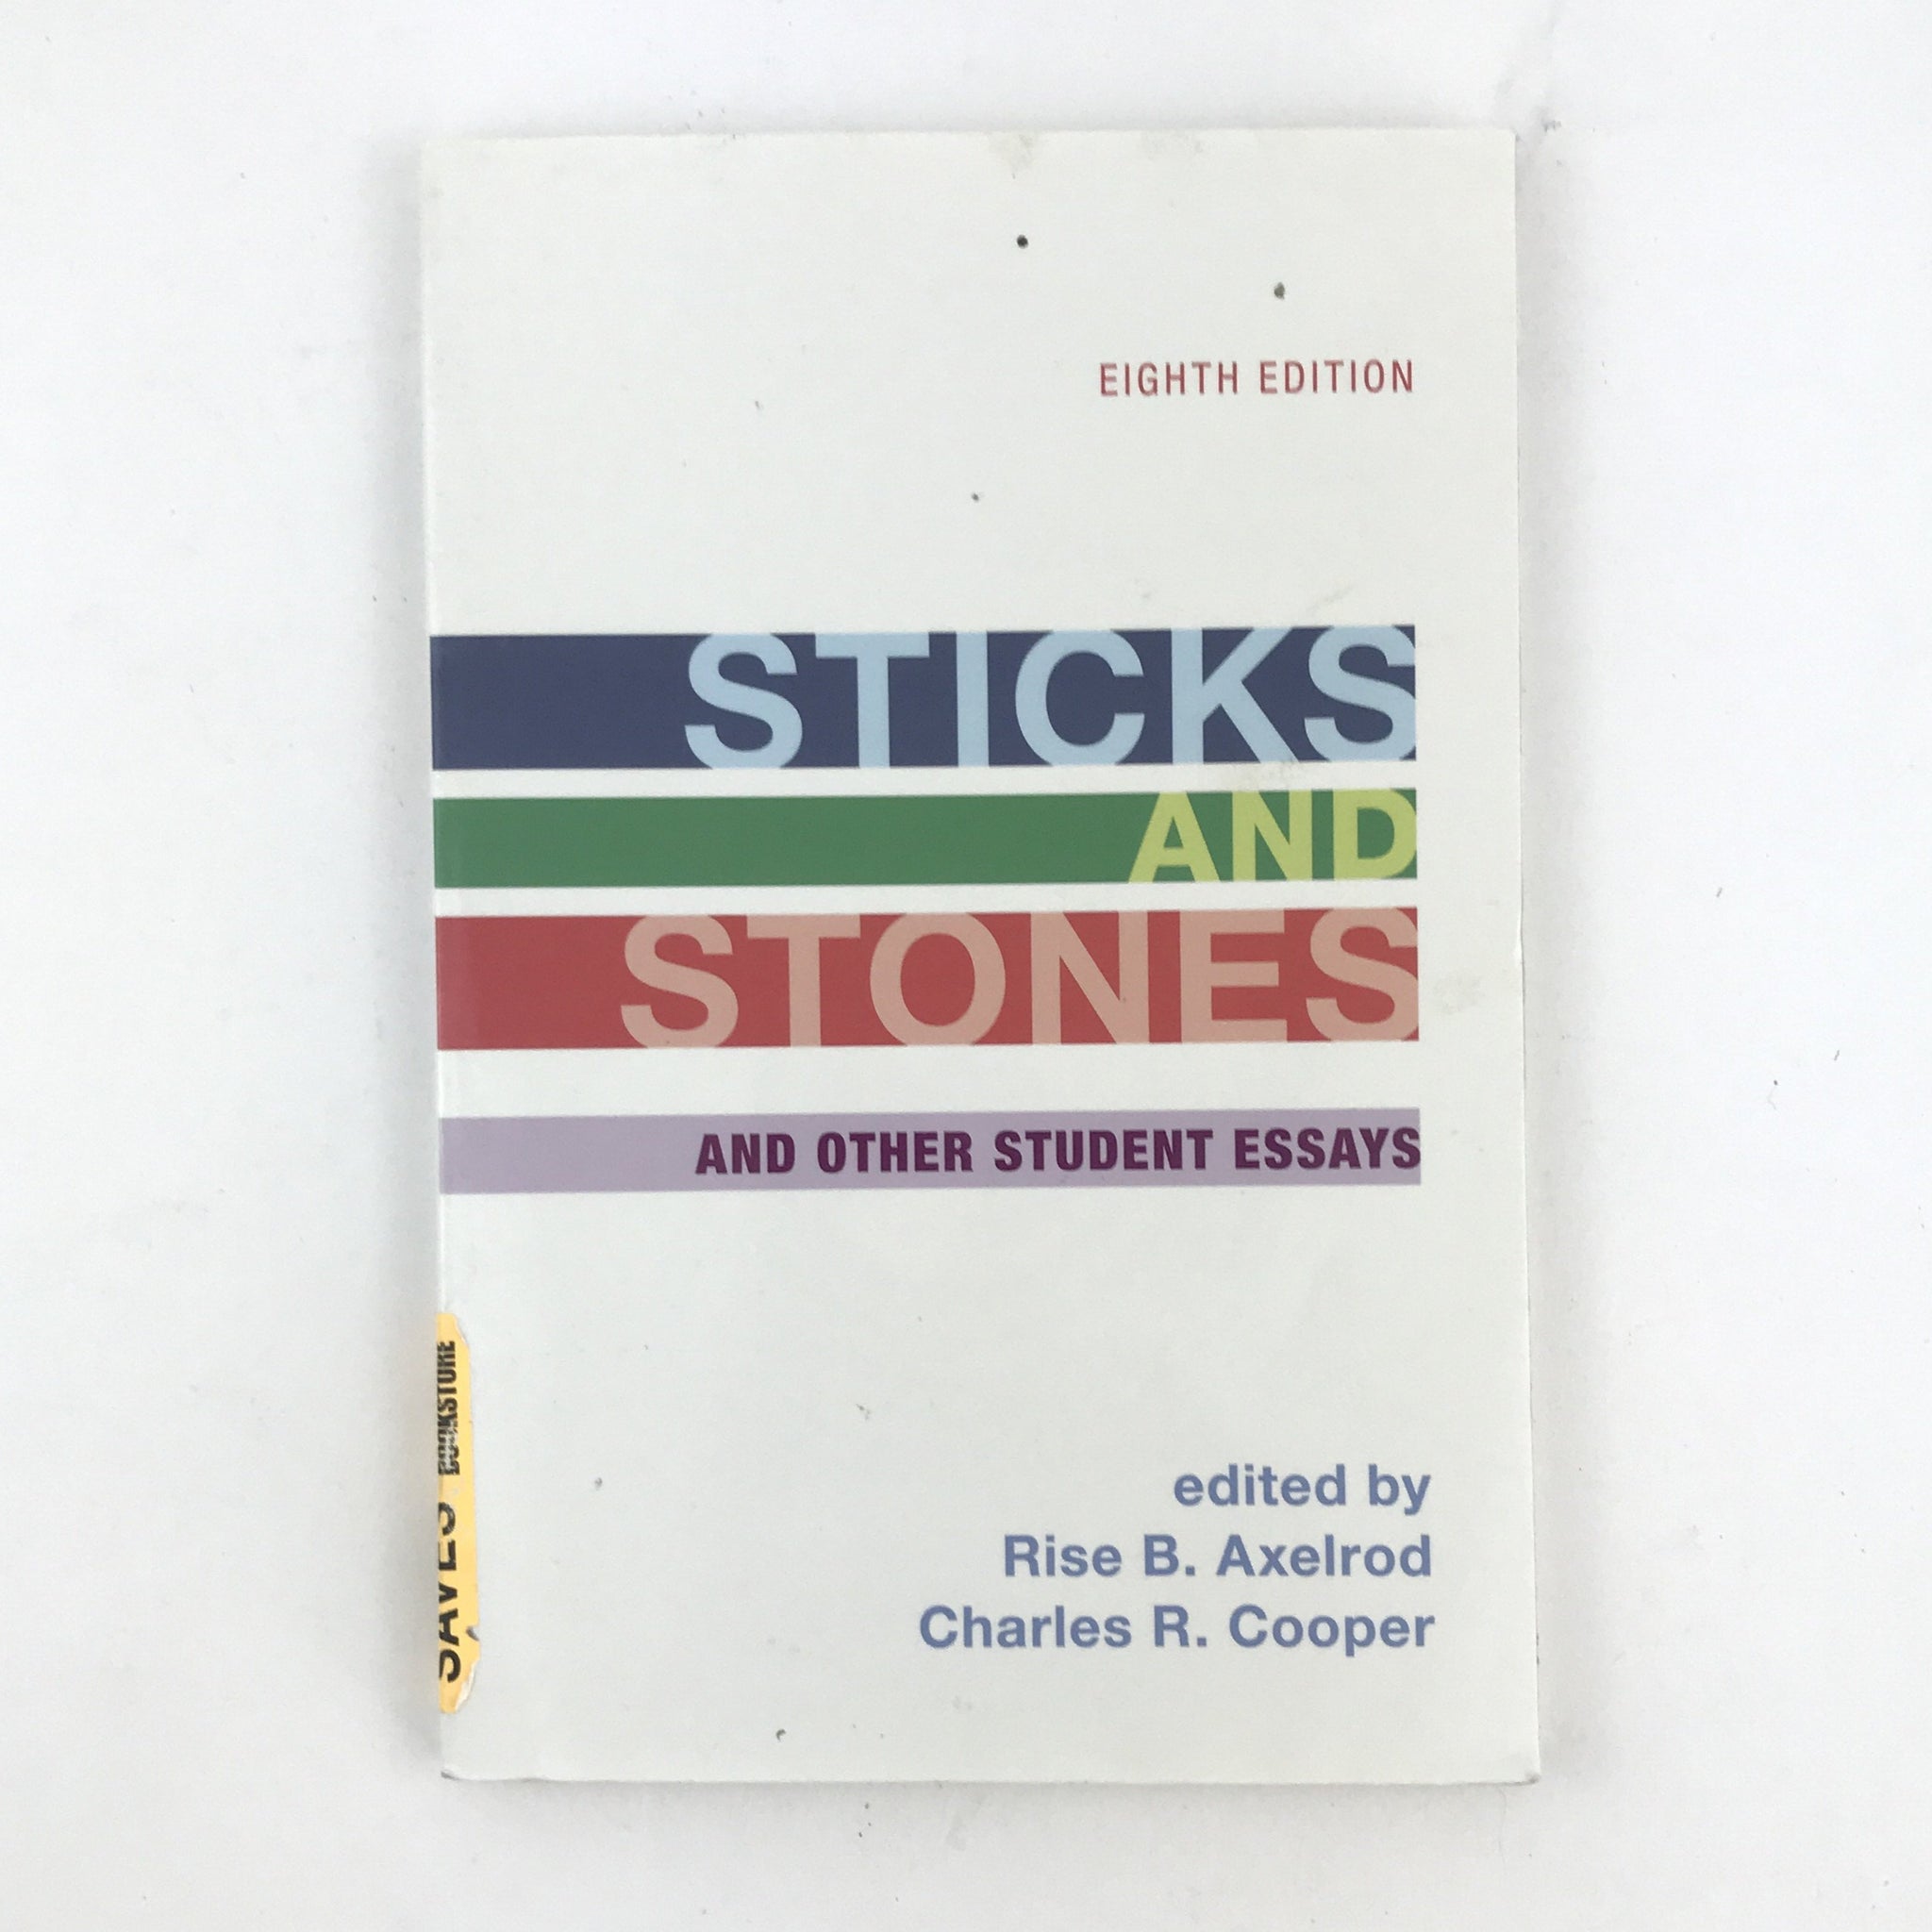 Sticks And Stones And Other Student Essays - 8th Edition